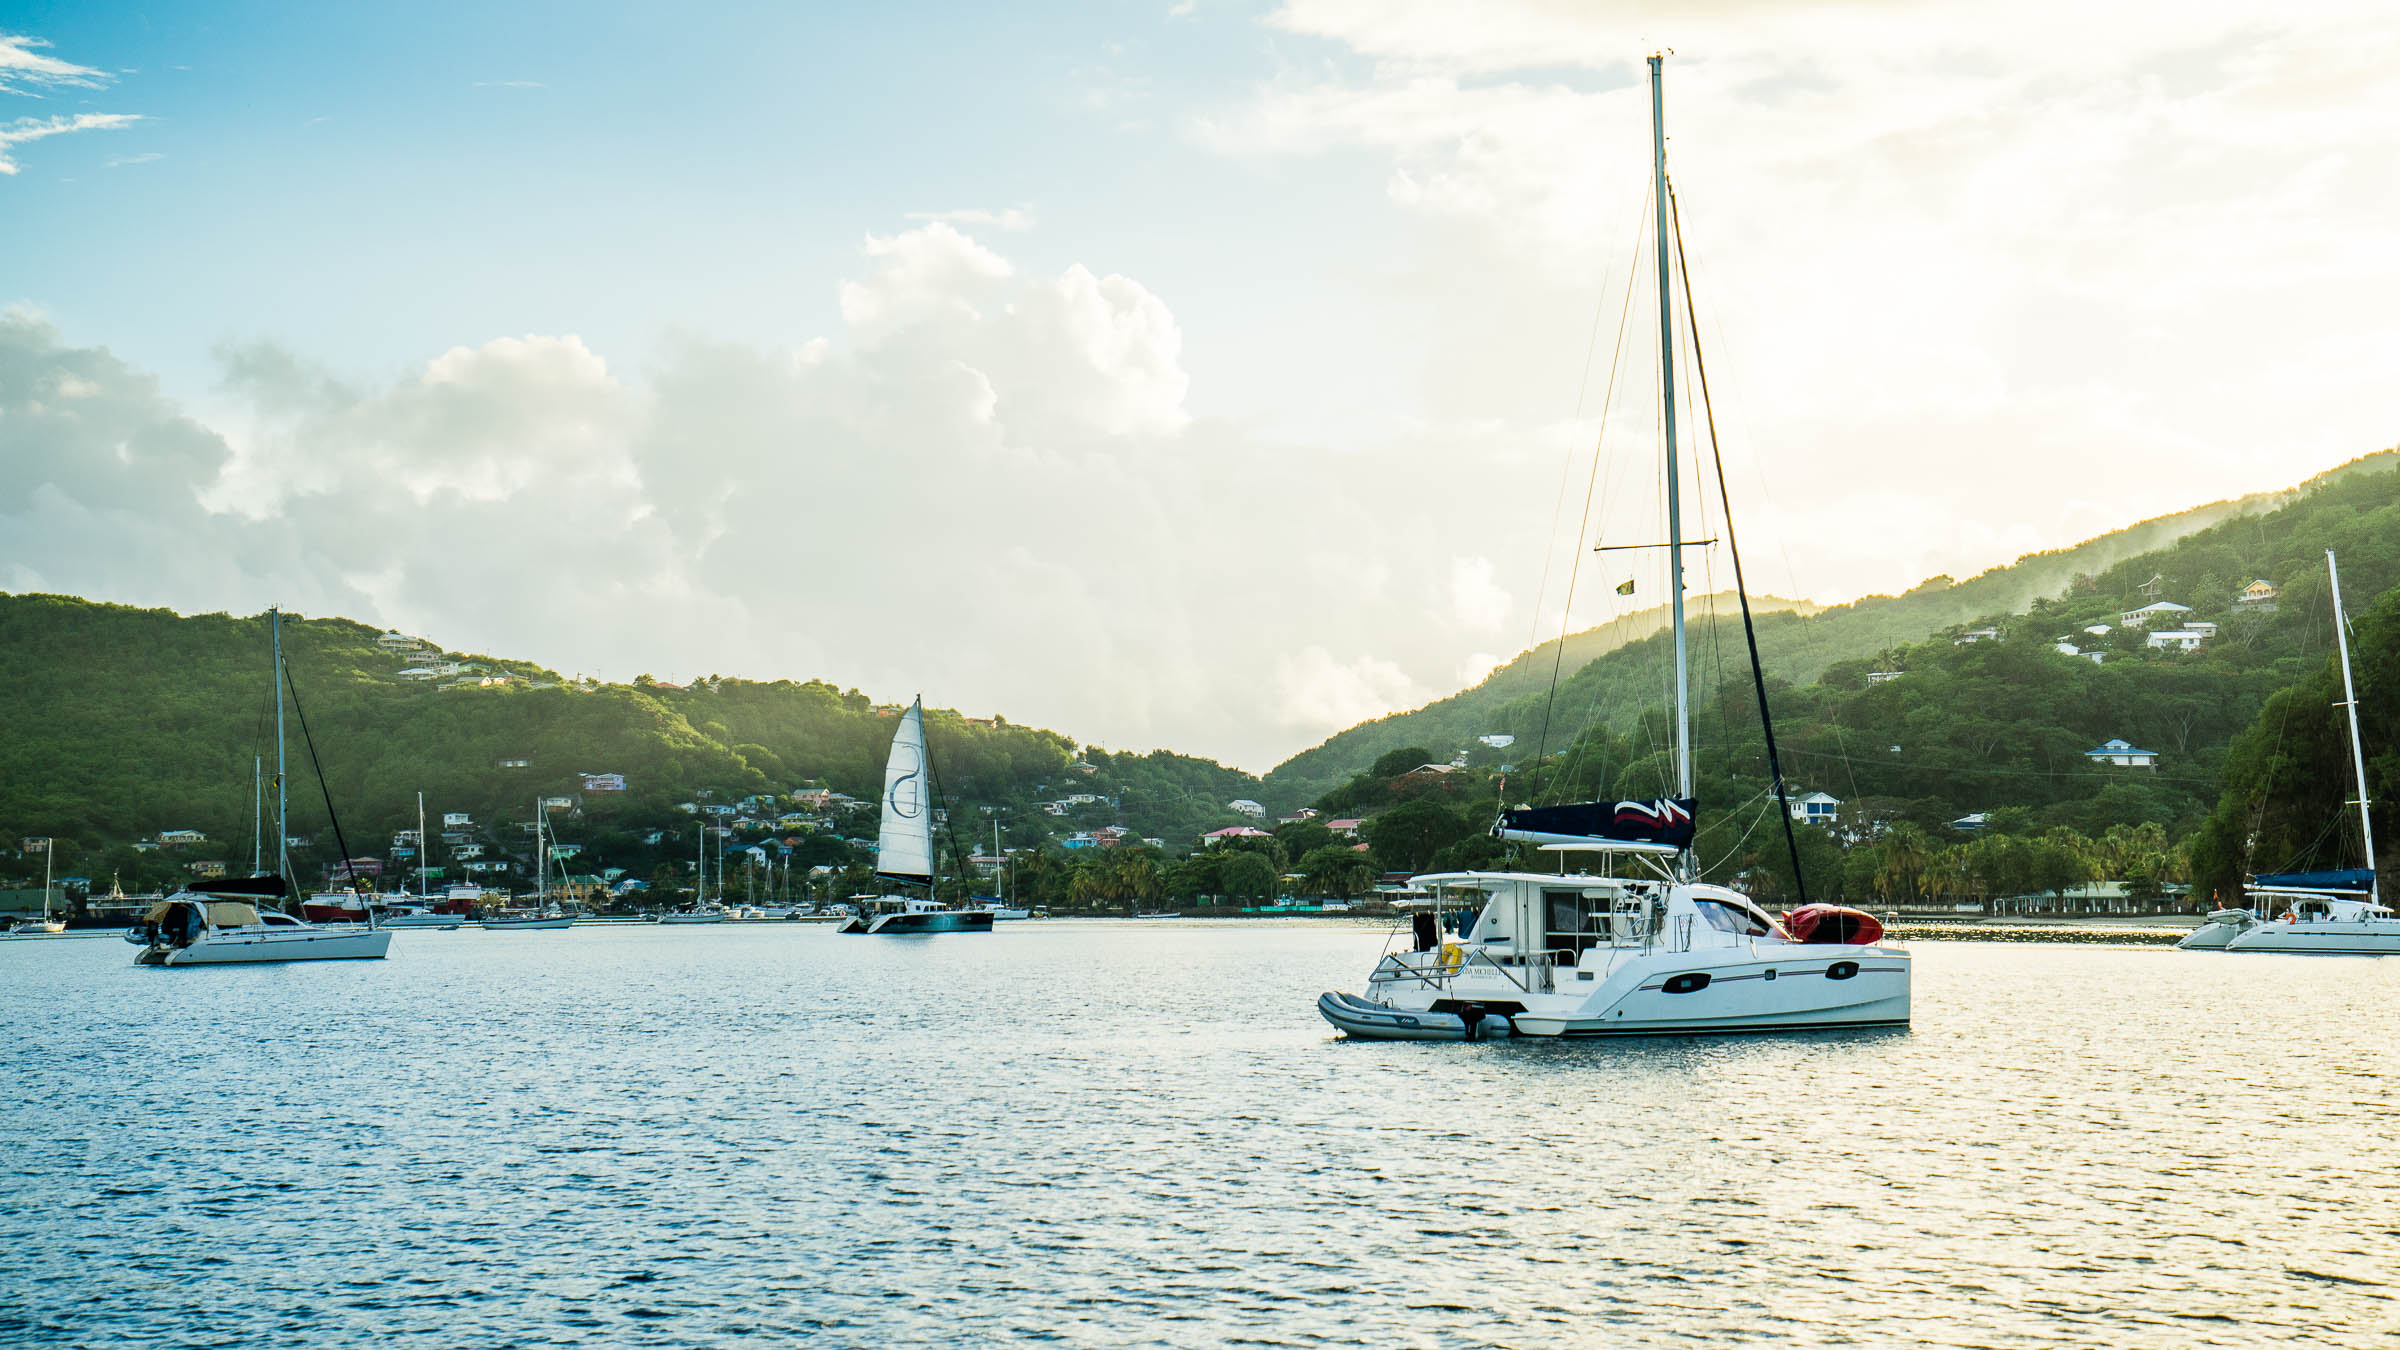 Sailing Admirality Bay, Bequia, The Grenadines by Patrick Bennett